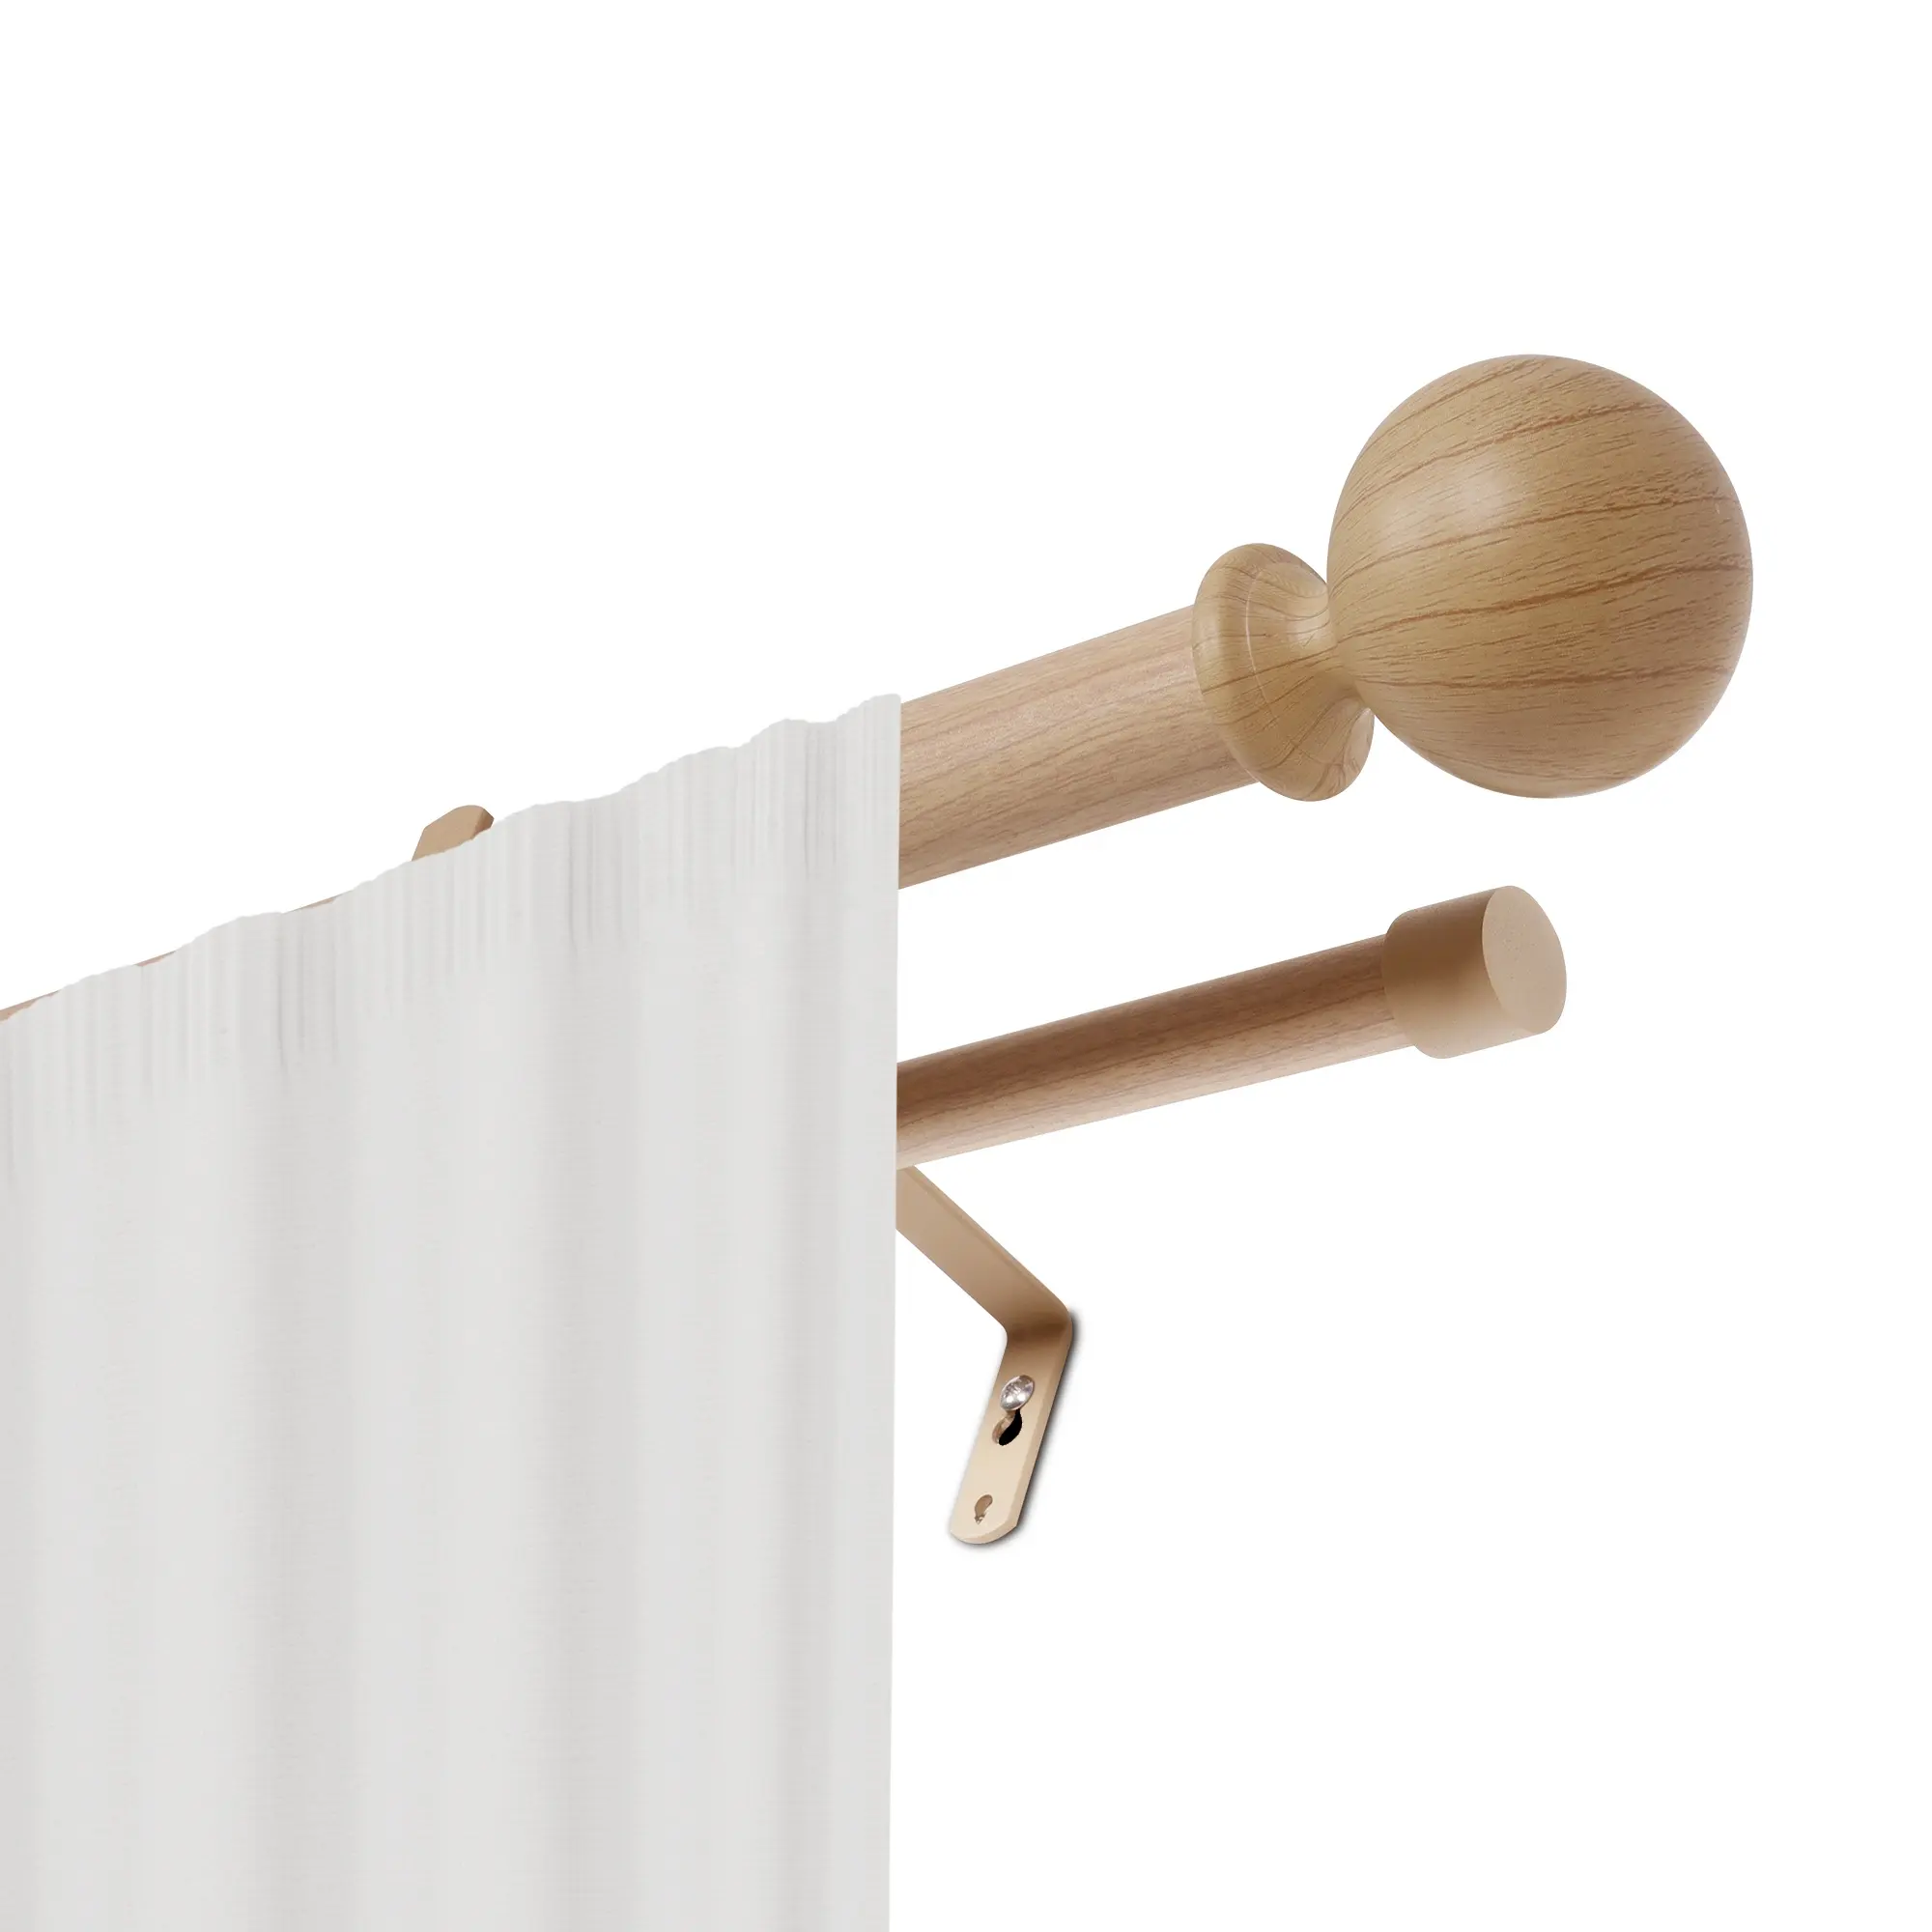 Home Metal Fashions Double Drapery Rod Ends Extendable Export Wood Grain Window Pole with Ball for South Europe Curtain